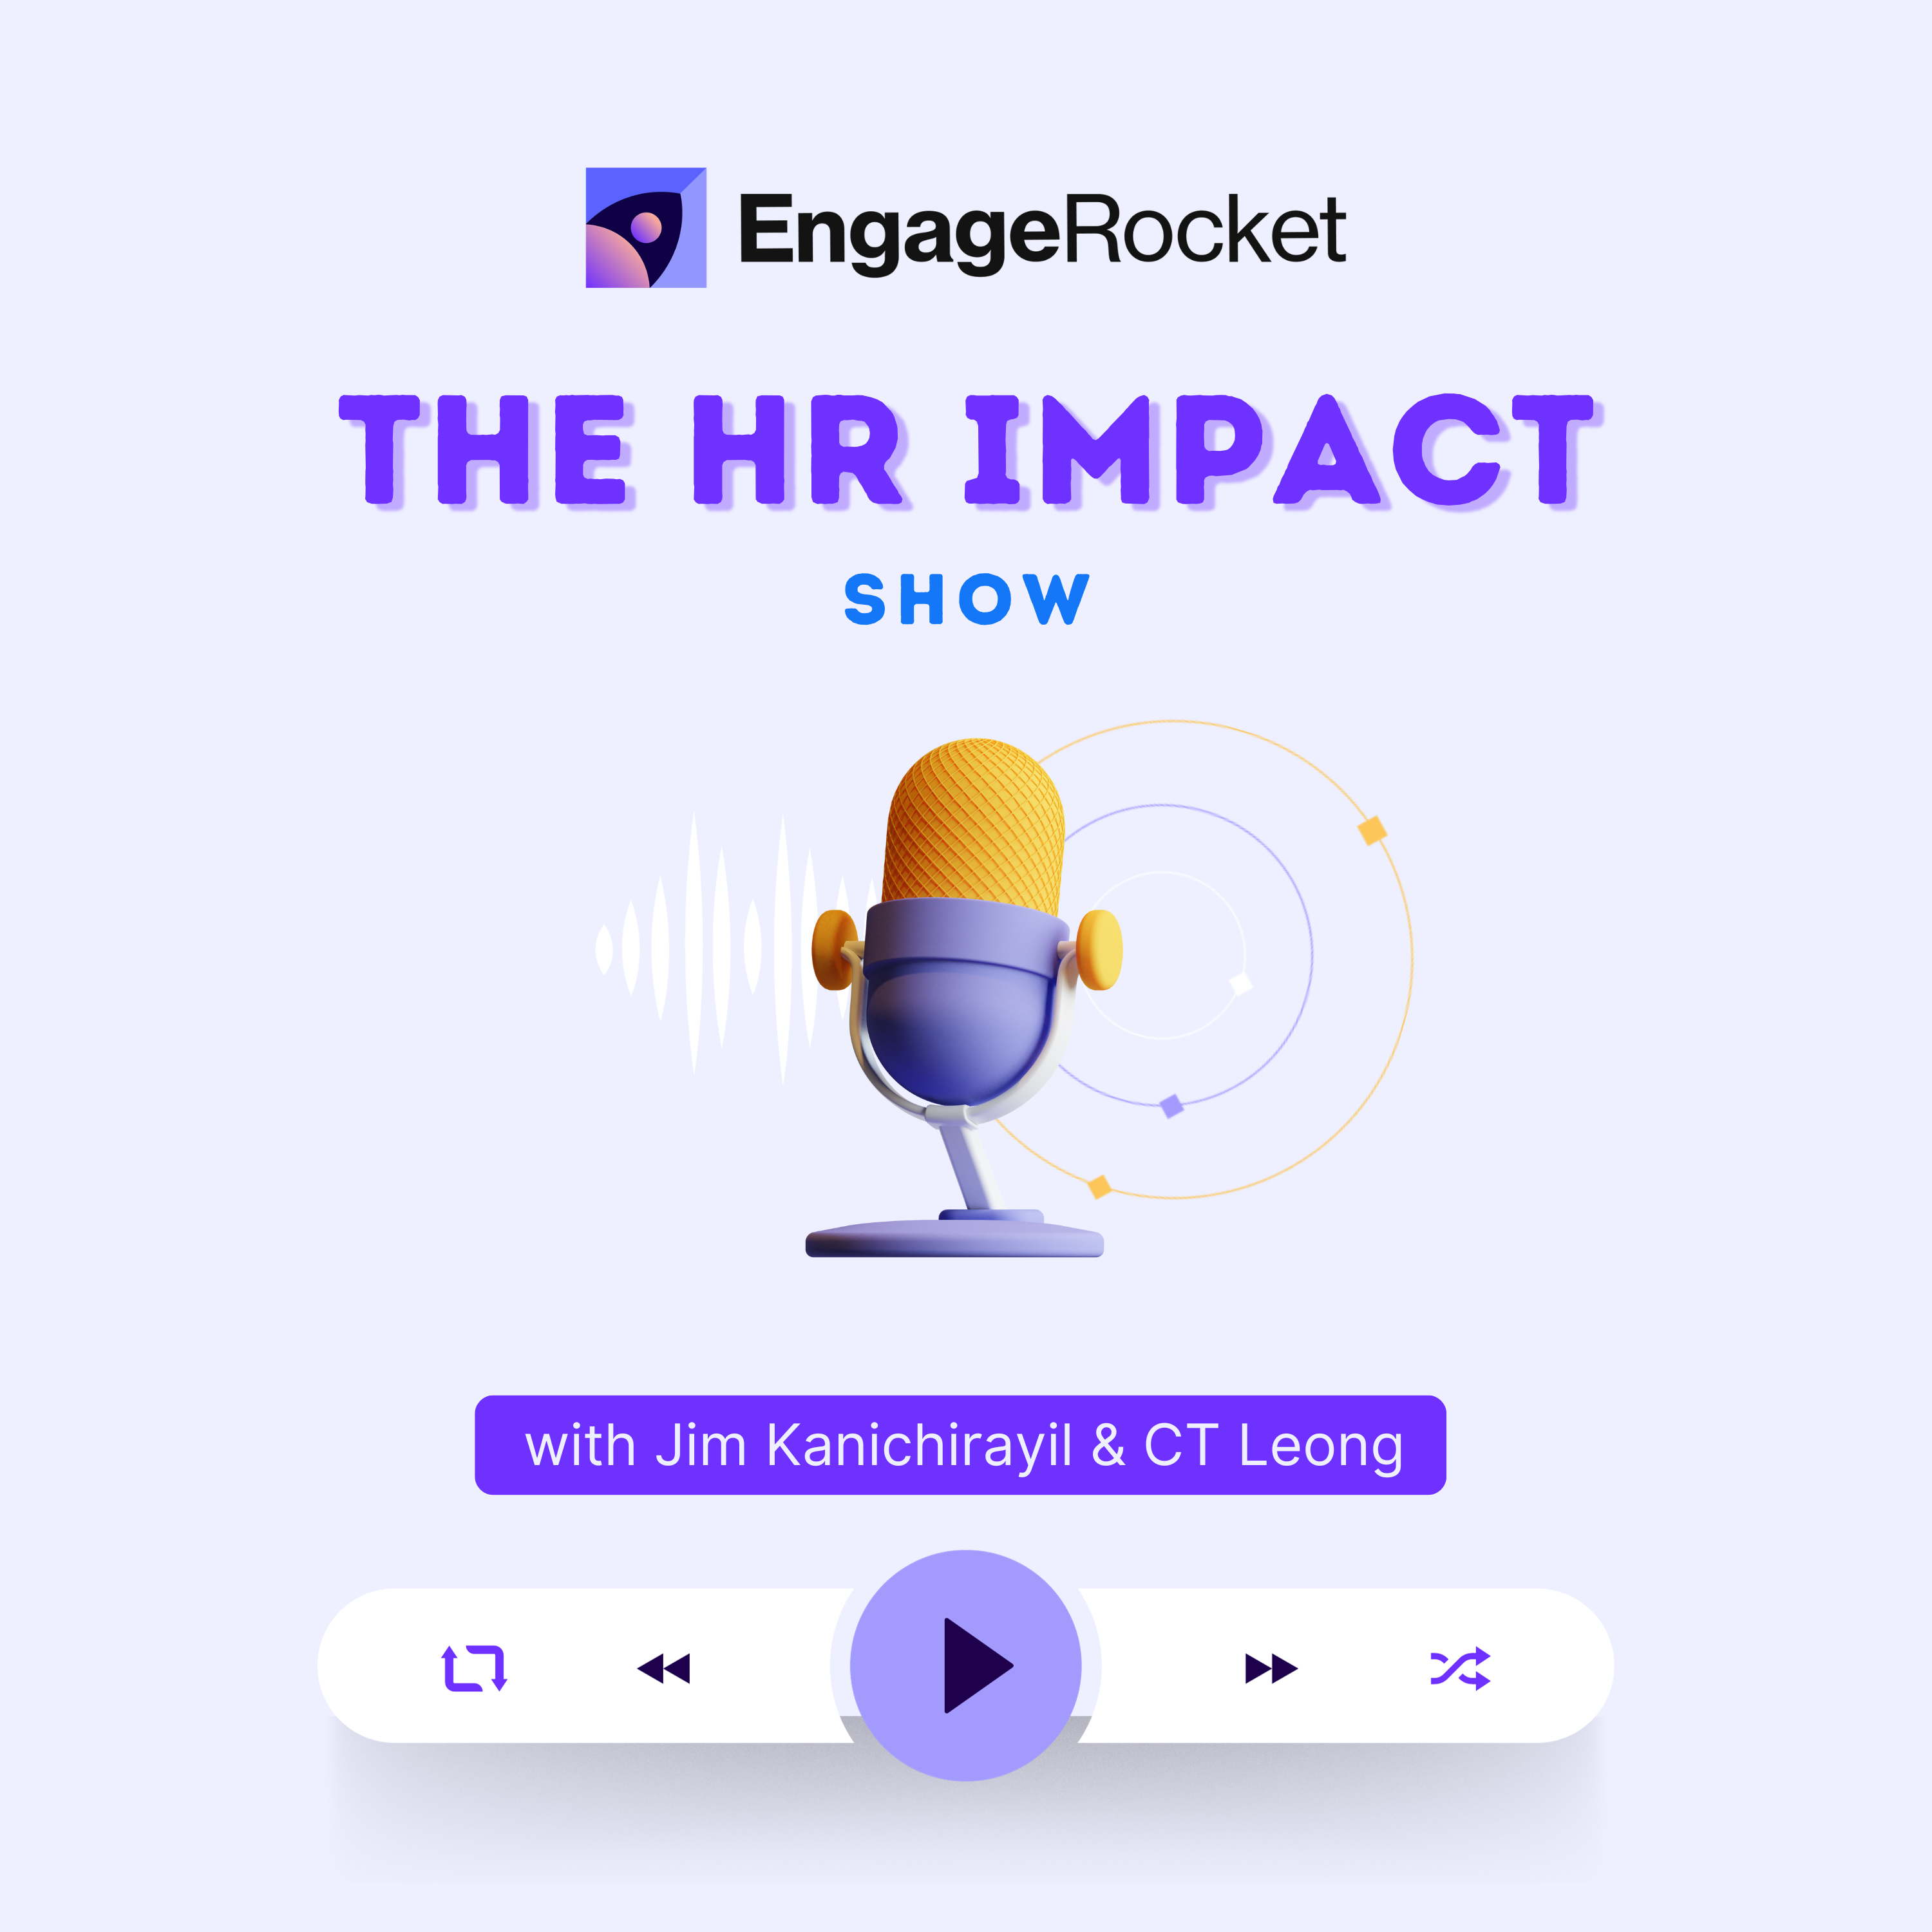 The HR Impact Show by EngageRocket